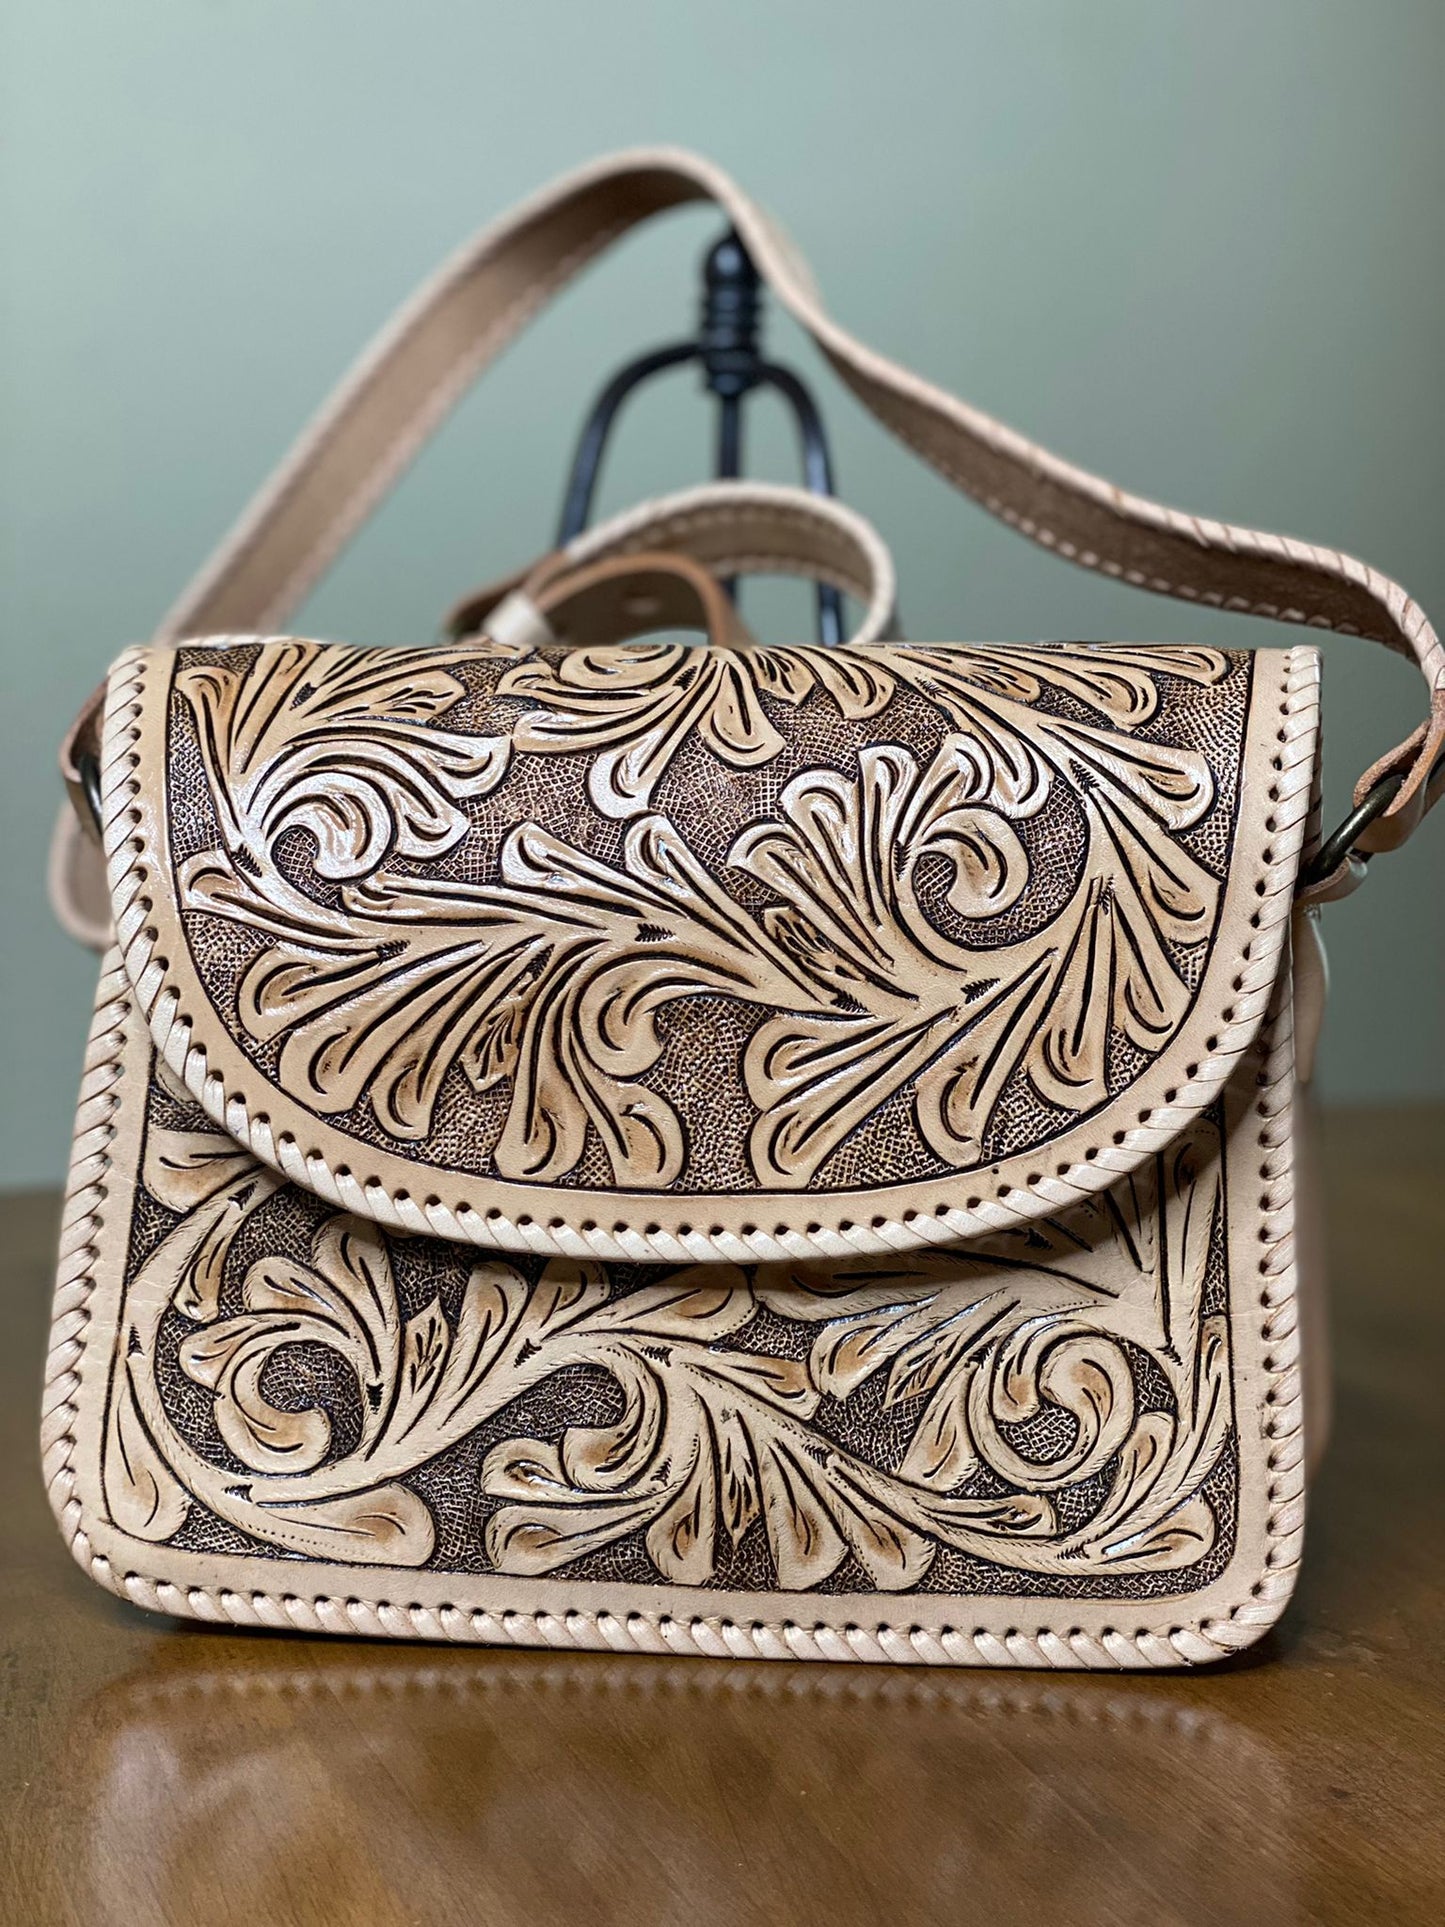 Hand-Chiseled Leather Purse